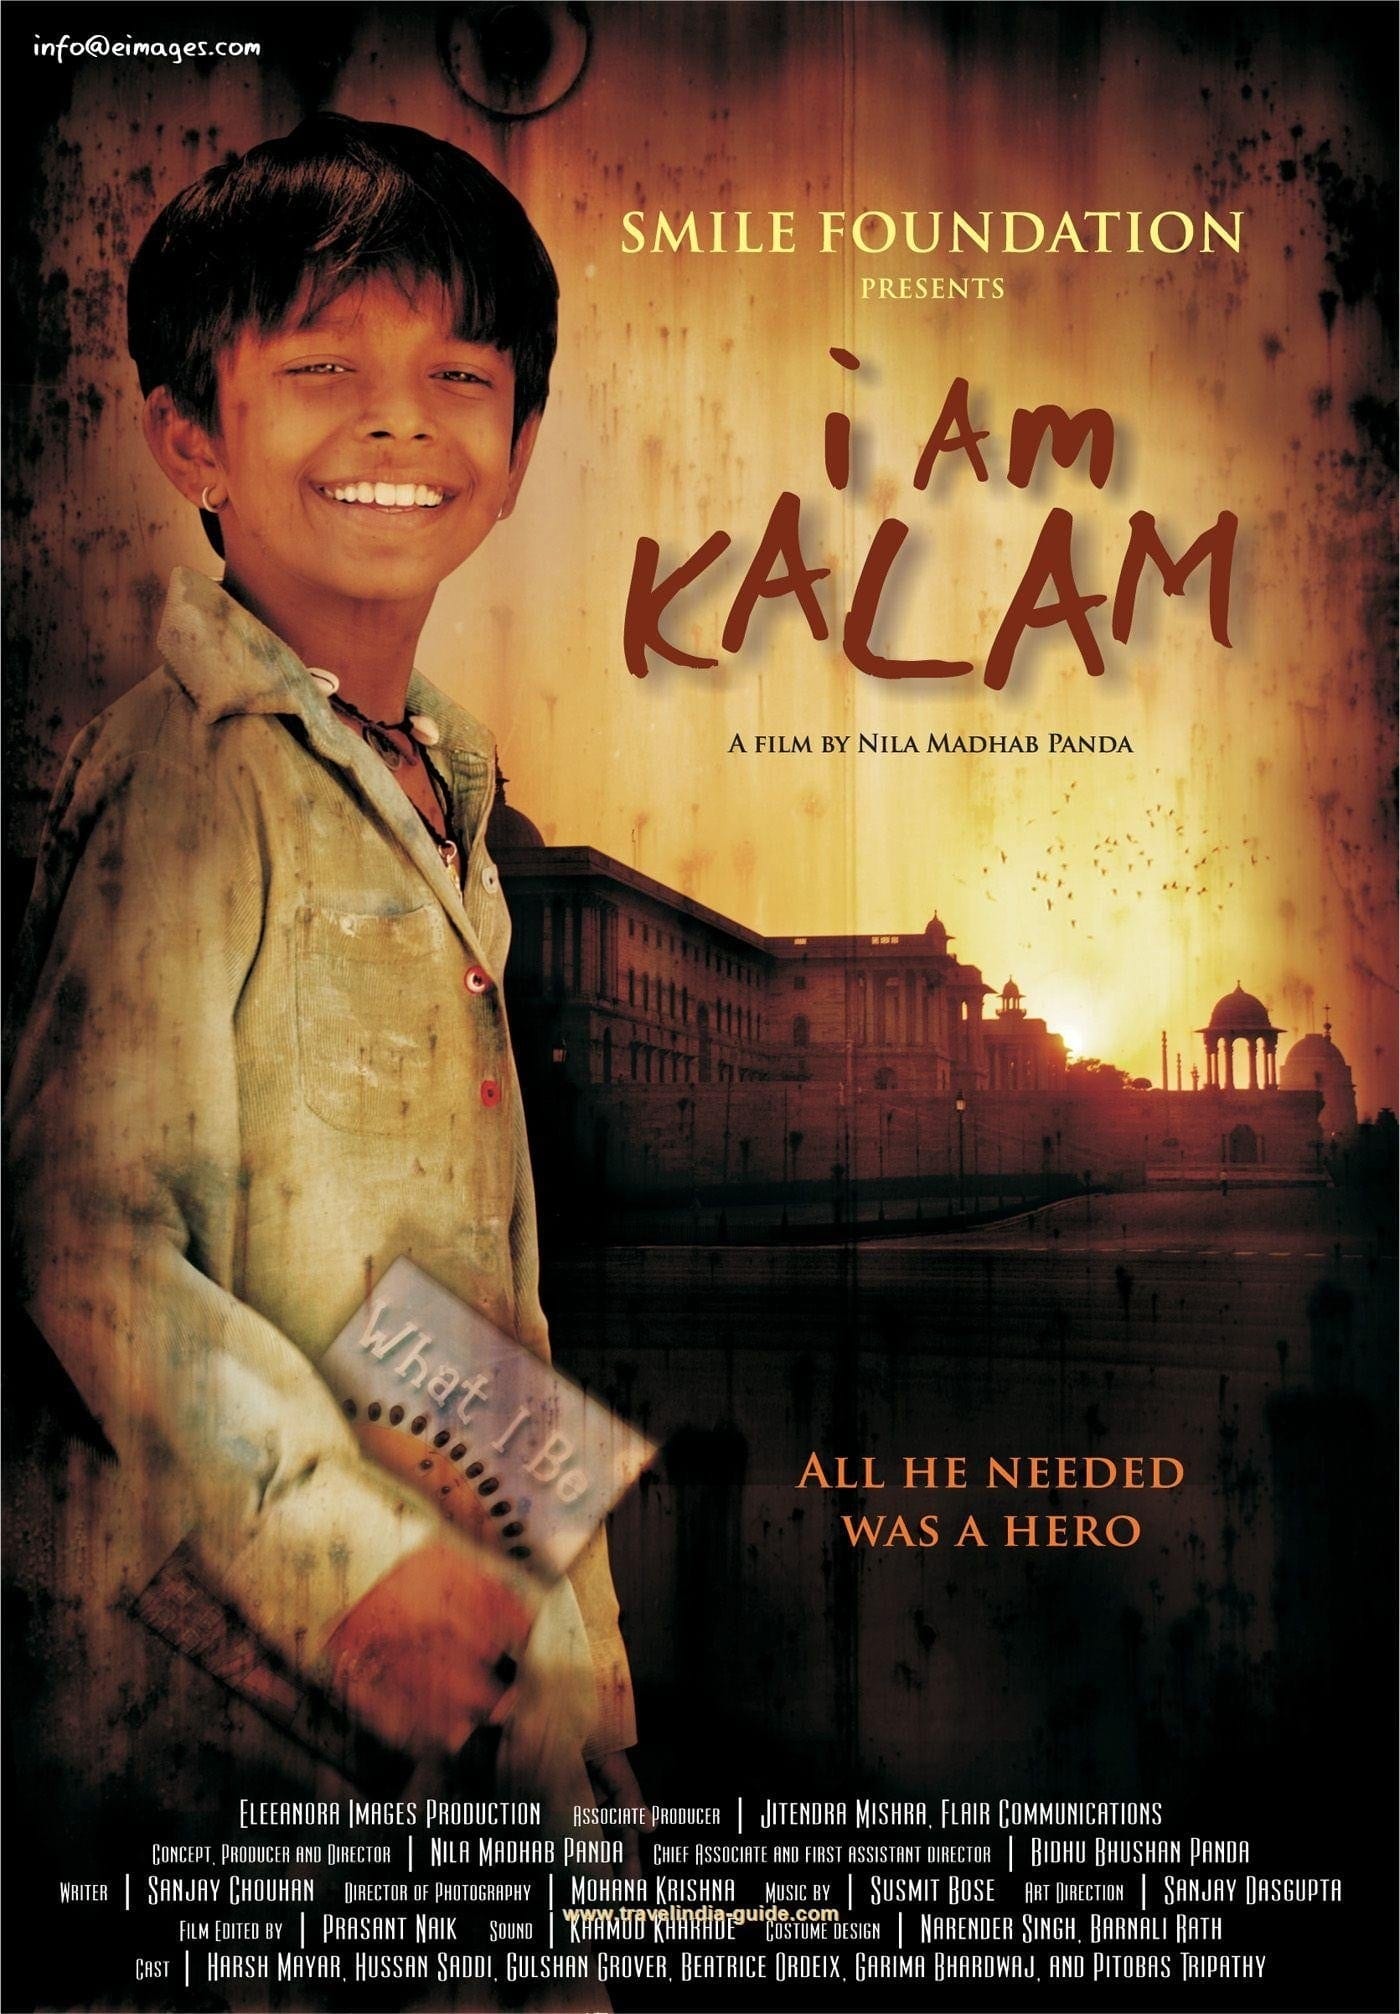 Poster for the movie "I Am Kalam"